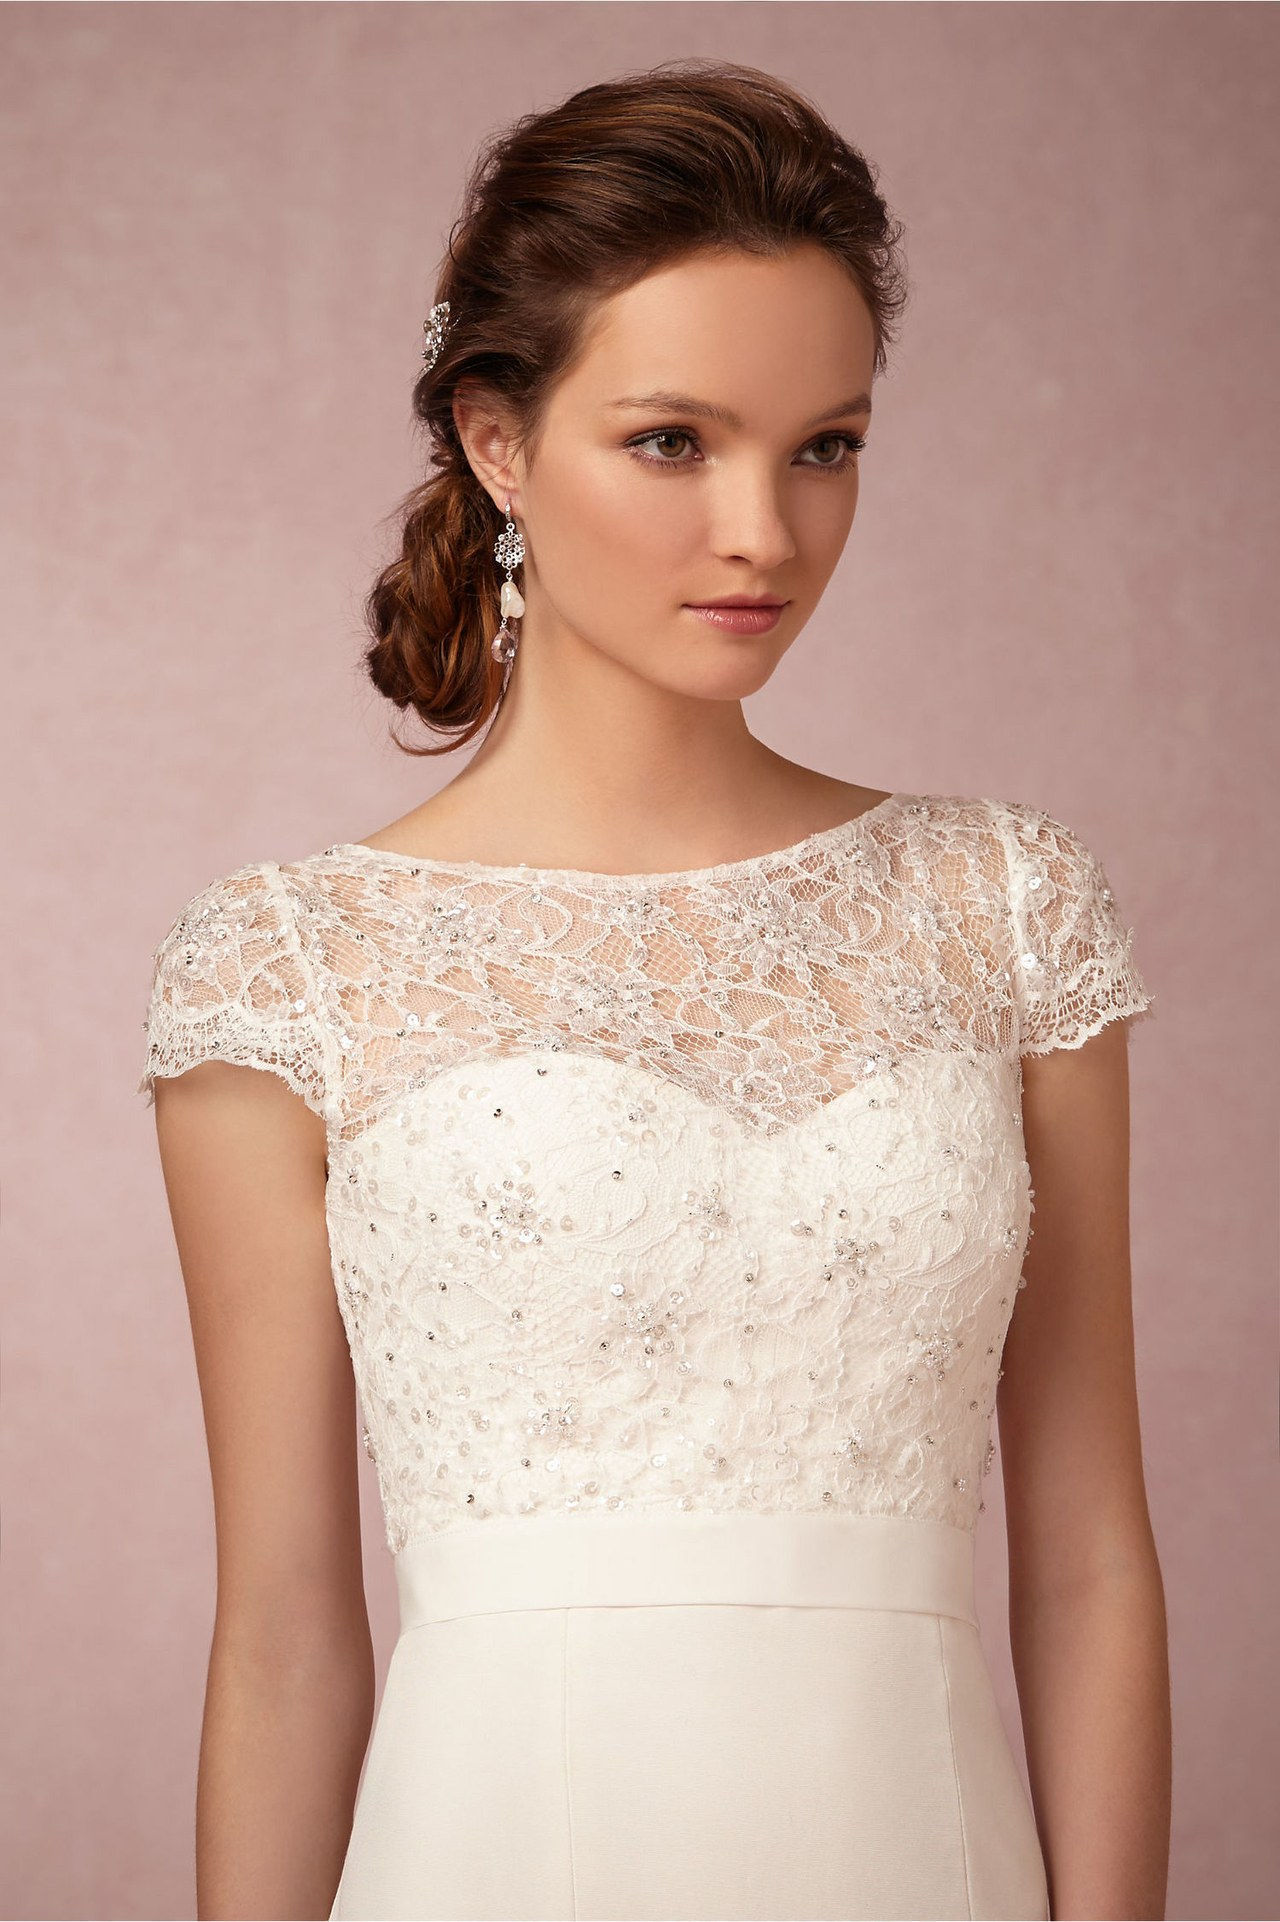 2D 2 in 1 wedding dresses wedding gowns mix and match wedding dresses bhldn 0430 courtesy